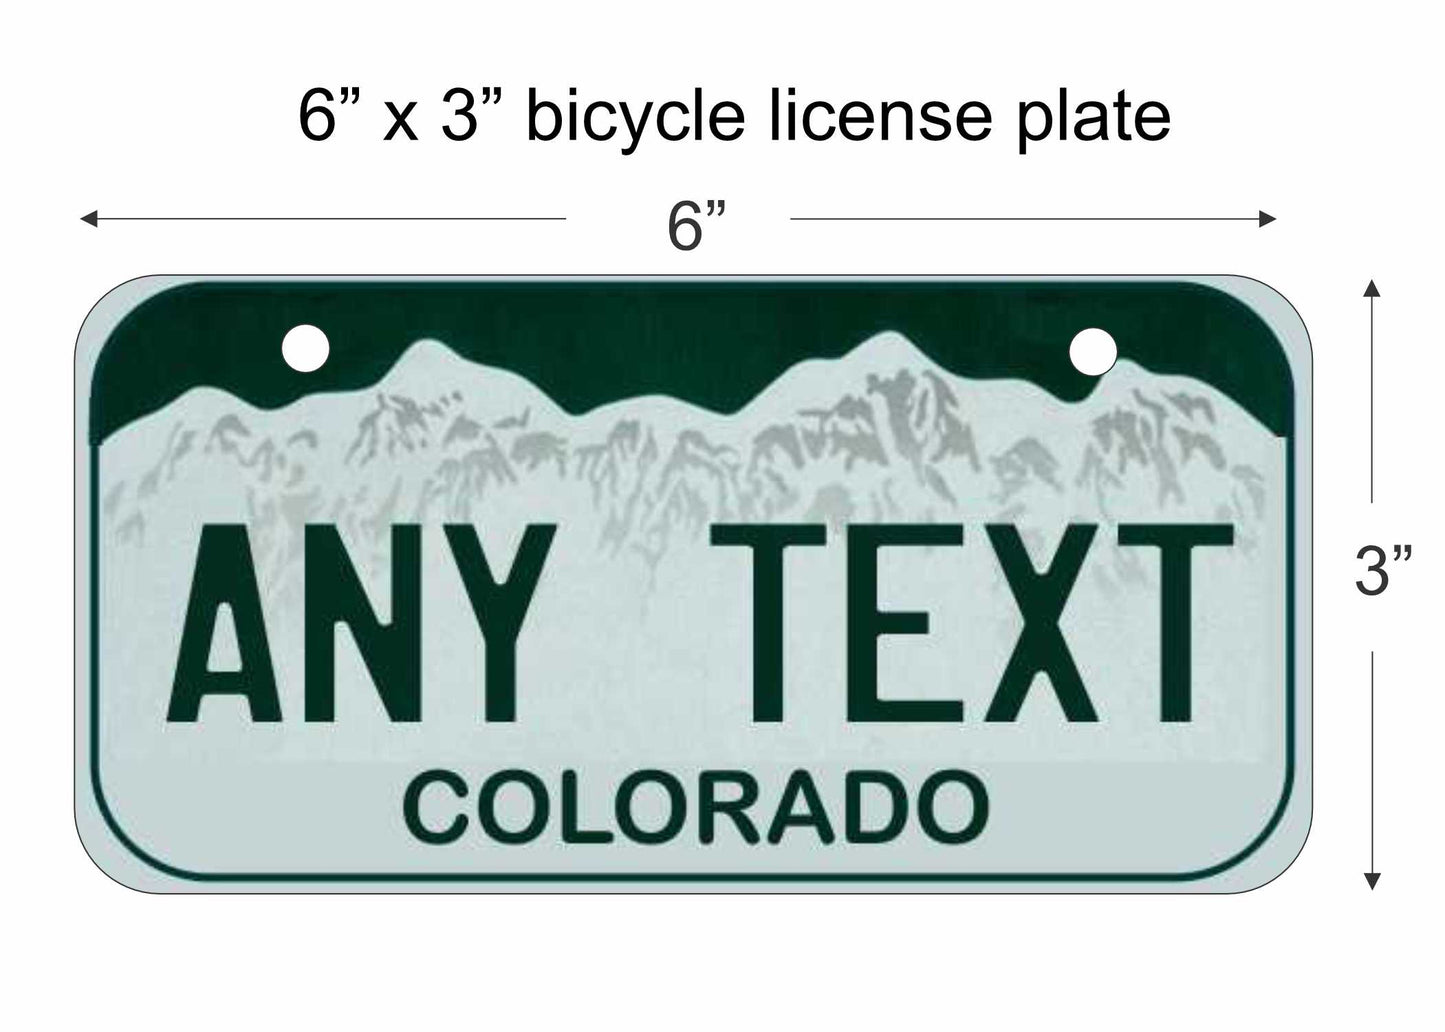 Colorado state replica bicycle license plate personalized with any text custom made decorative aluminum sign